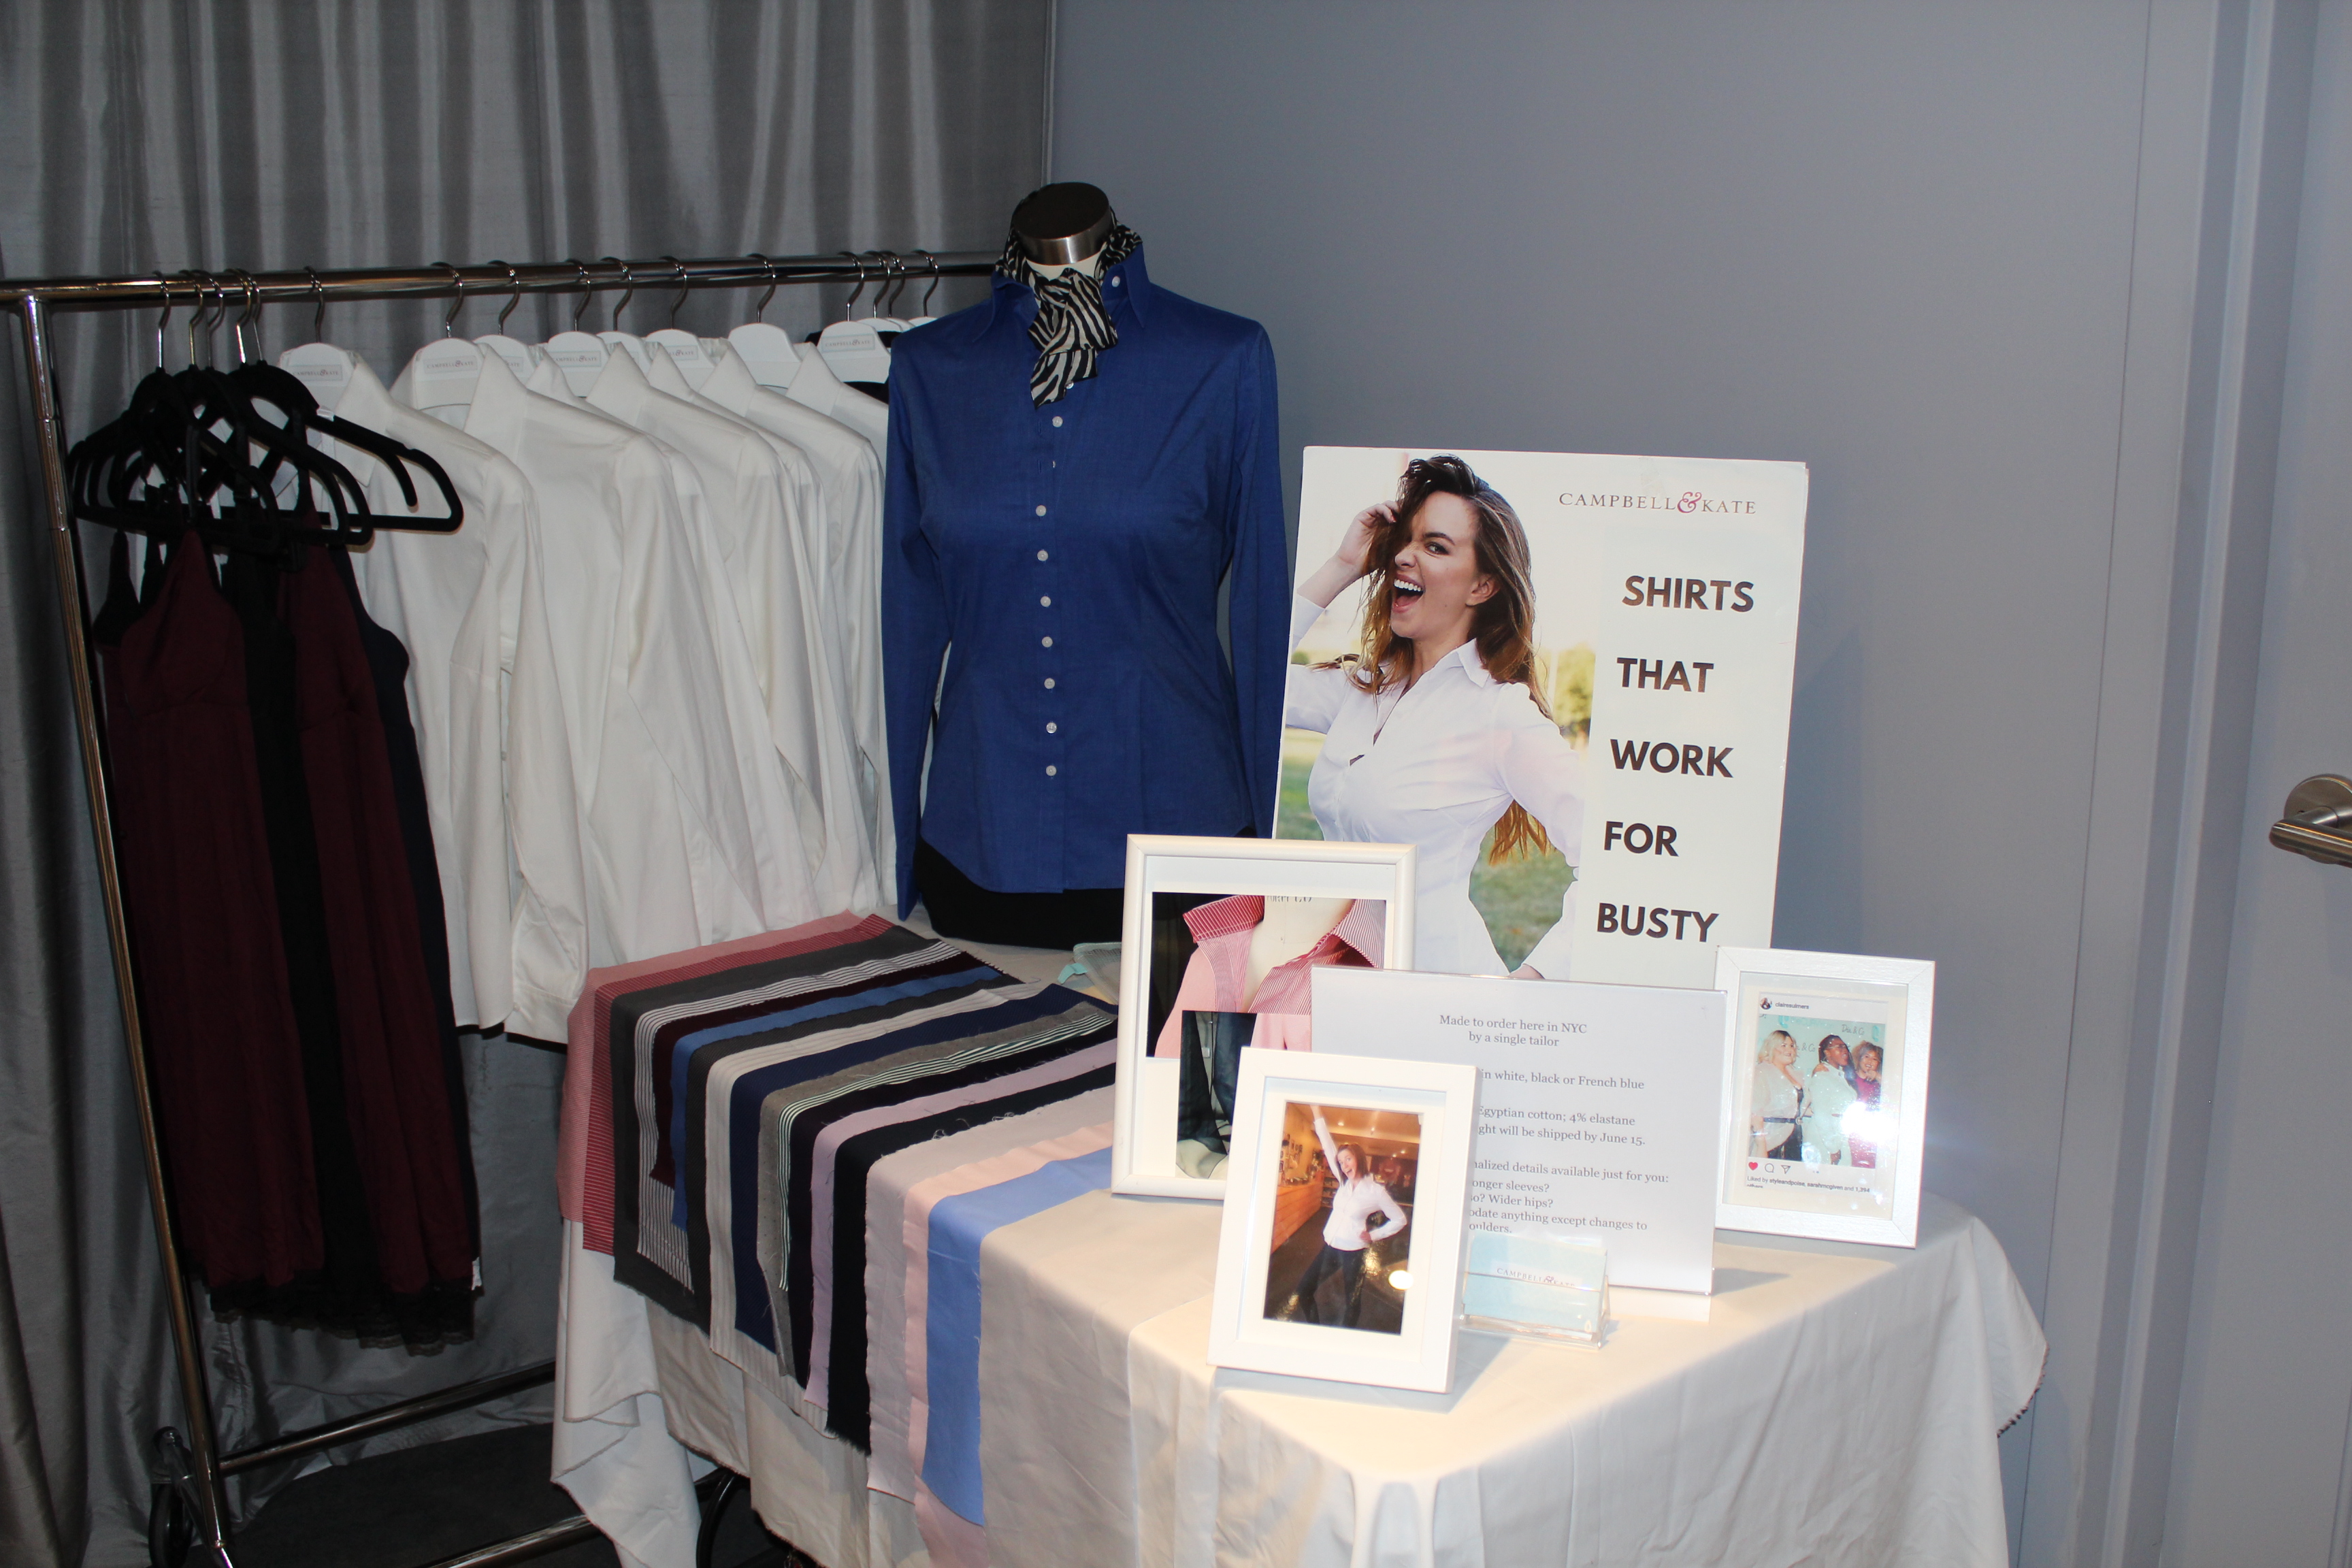 Campbell and Kate Classic Button-down Display at Rigby & Peller's Ladies's Night